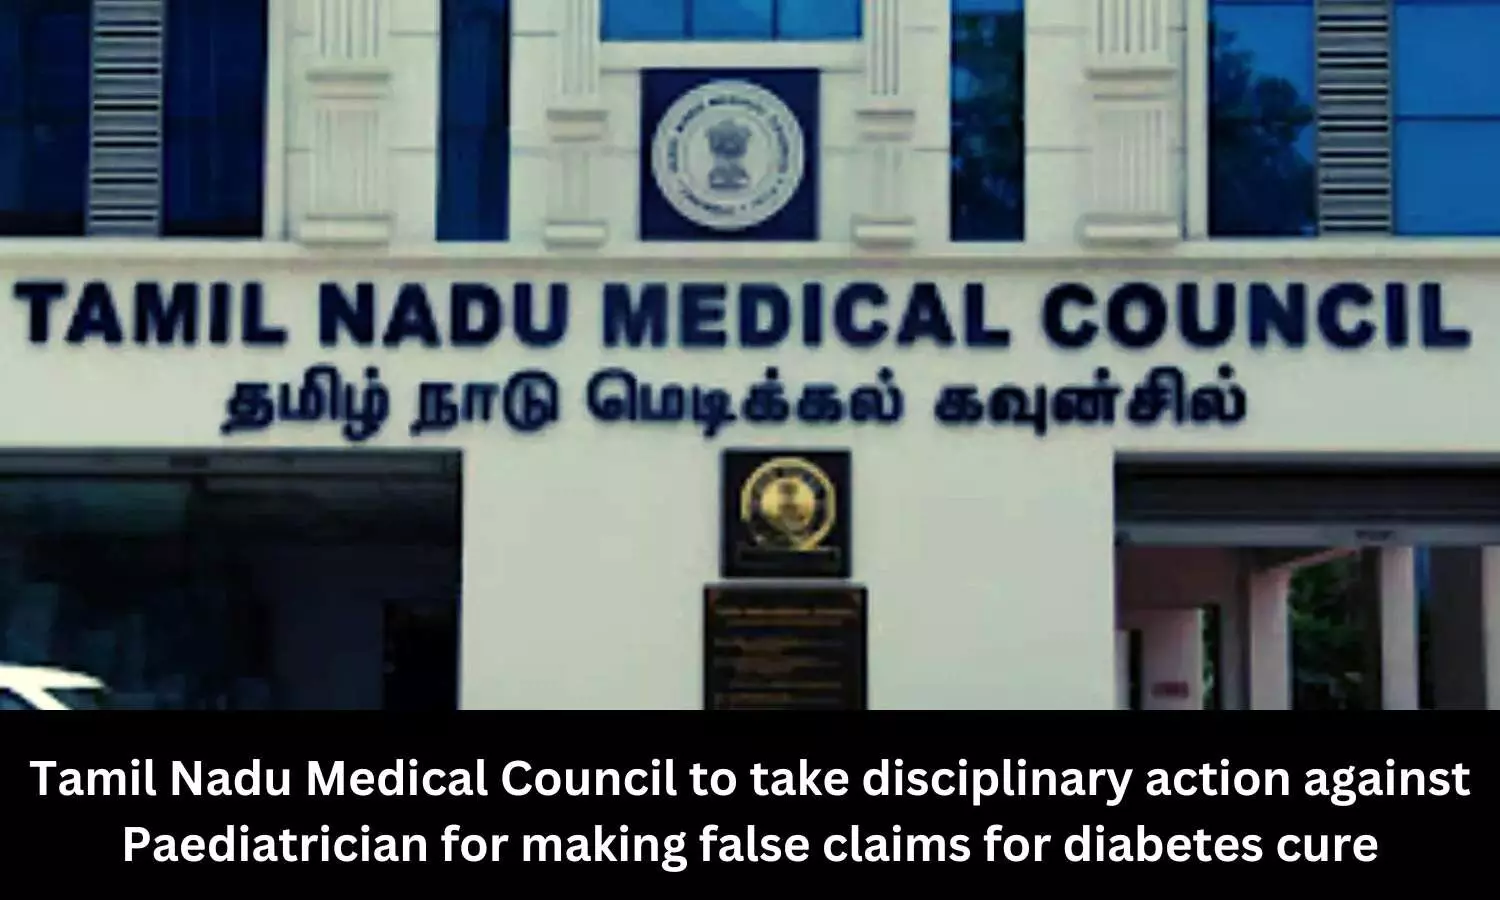 False claims for diabetes cure: Tamil Nadu Medical Council to take disciplinary action against doctor